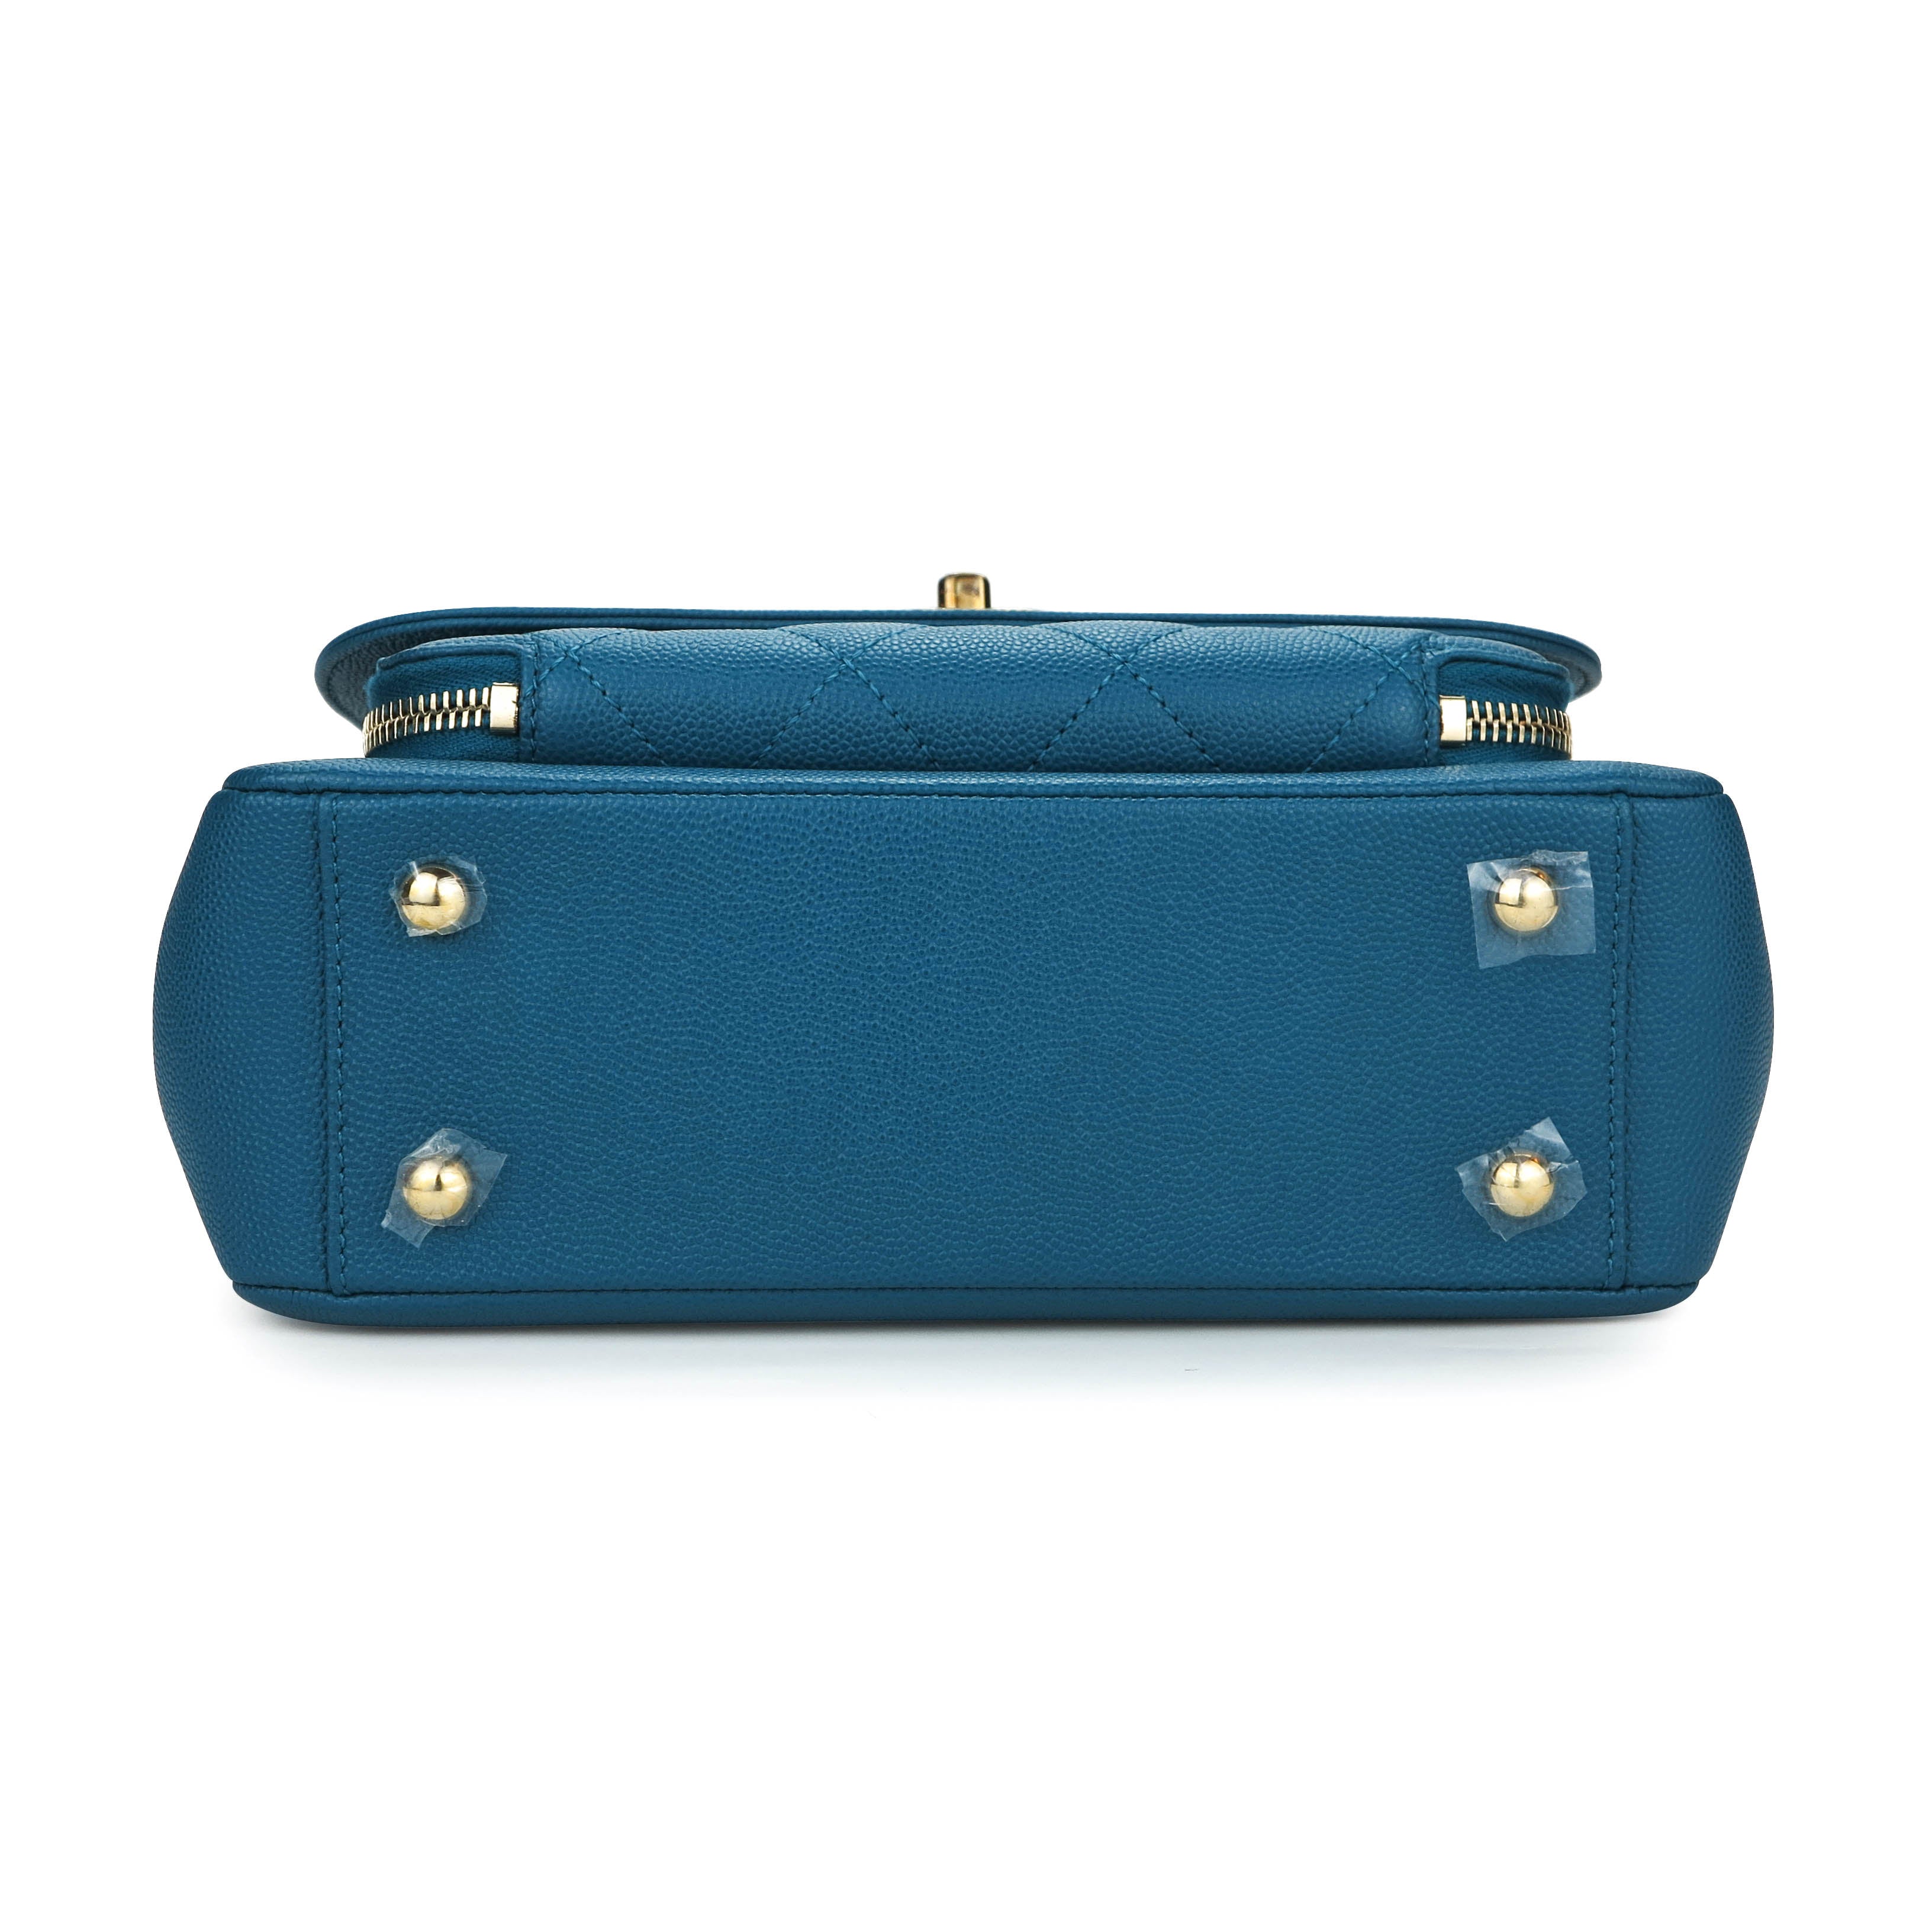 Medium Business Affinity Flap Bag in Turquoise Caviar